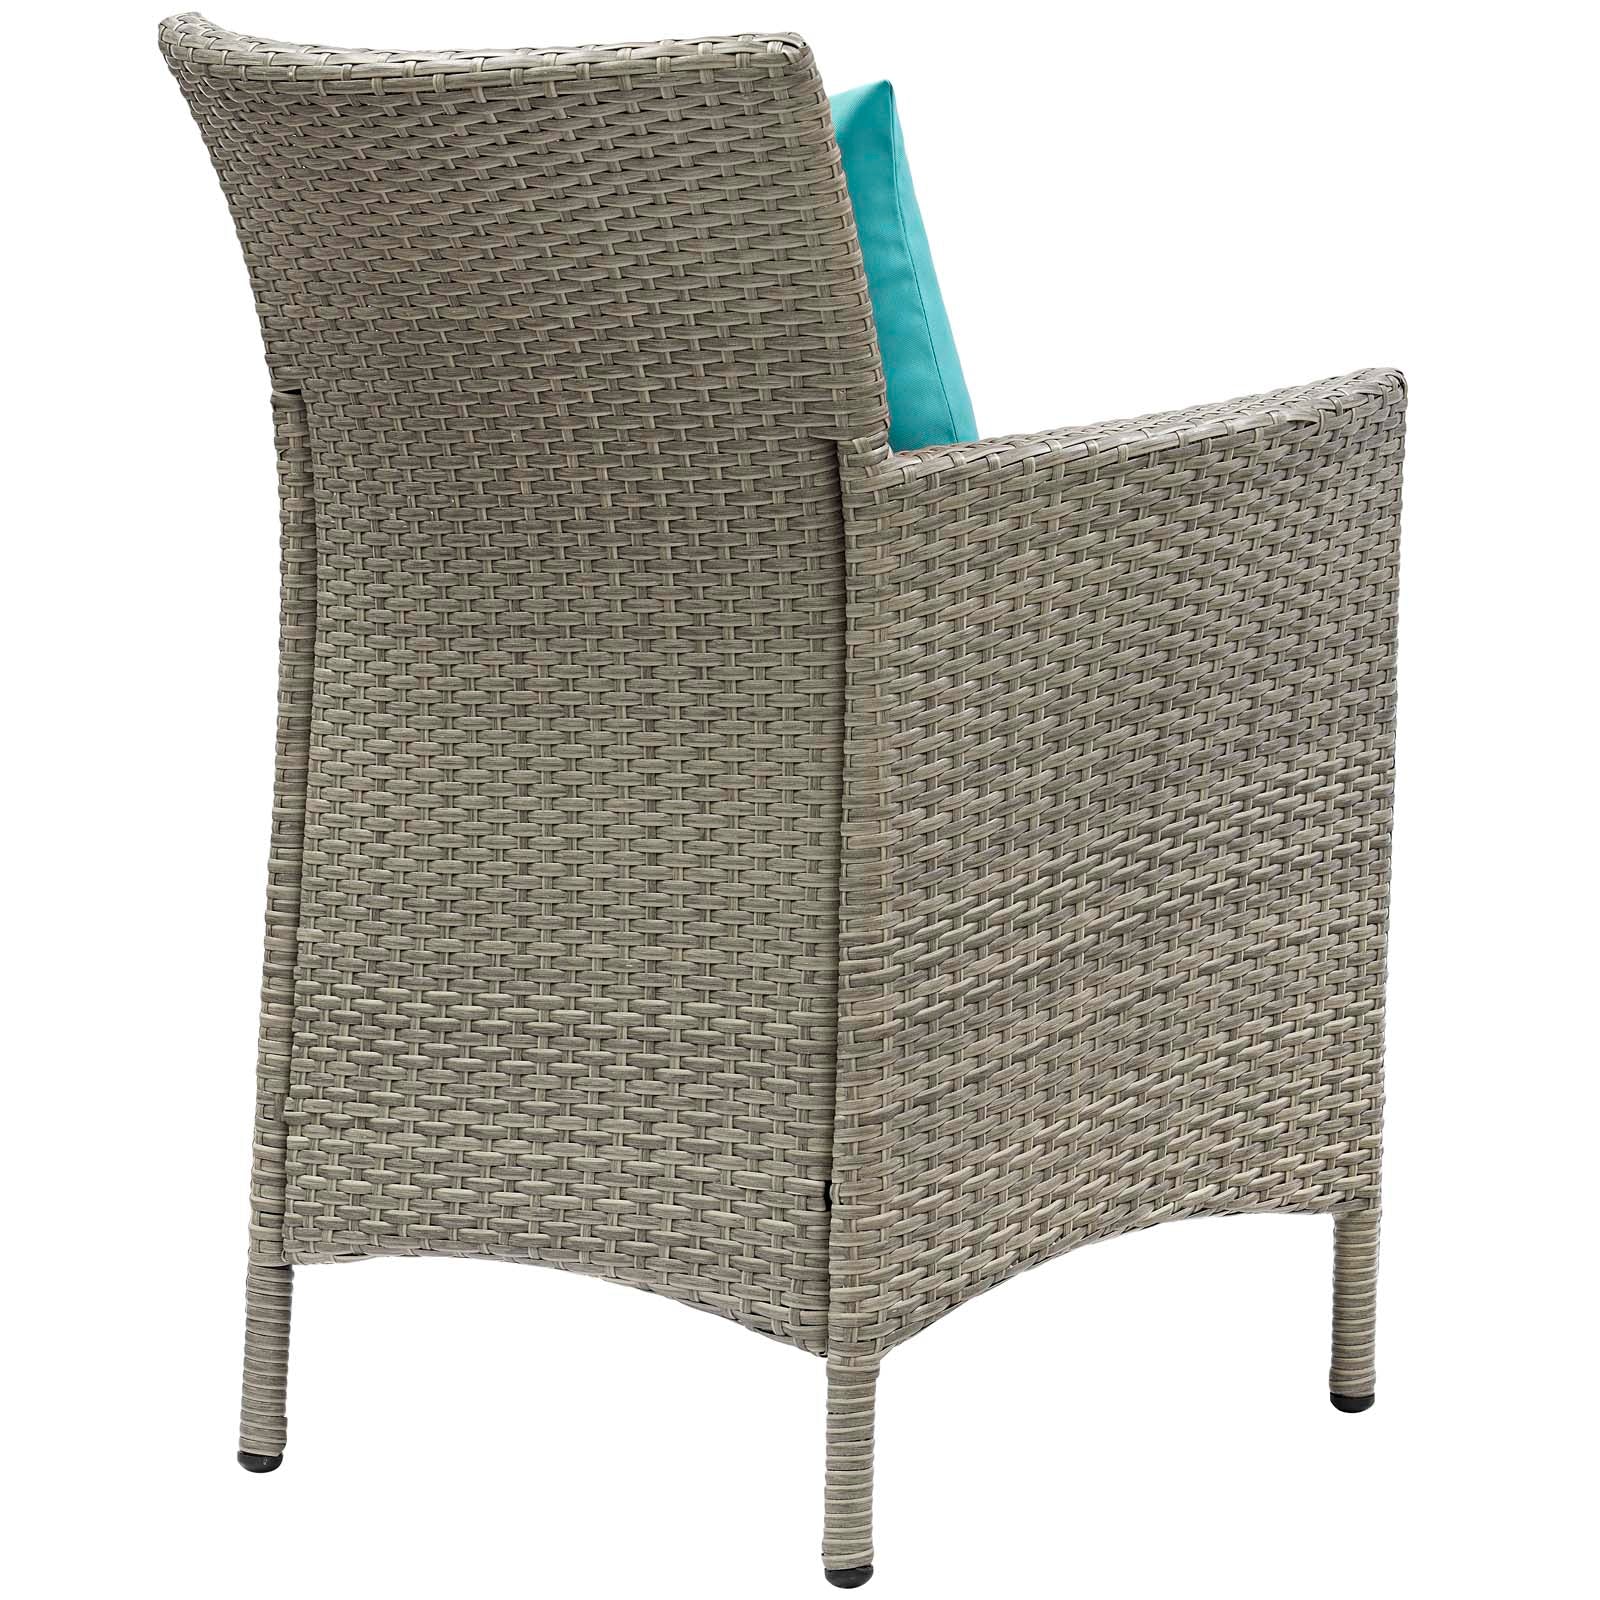 Modway Outdoor Dining Chairs - Conduit Outdoor Patio Wicker Rattan Dining Armchair Light Gray Turquoise